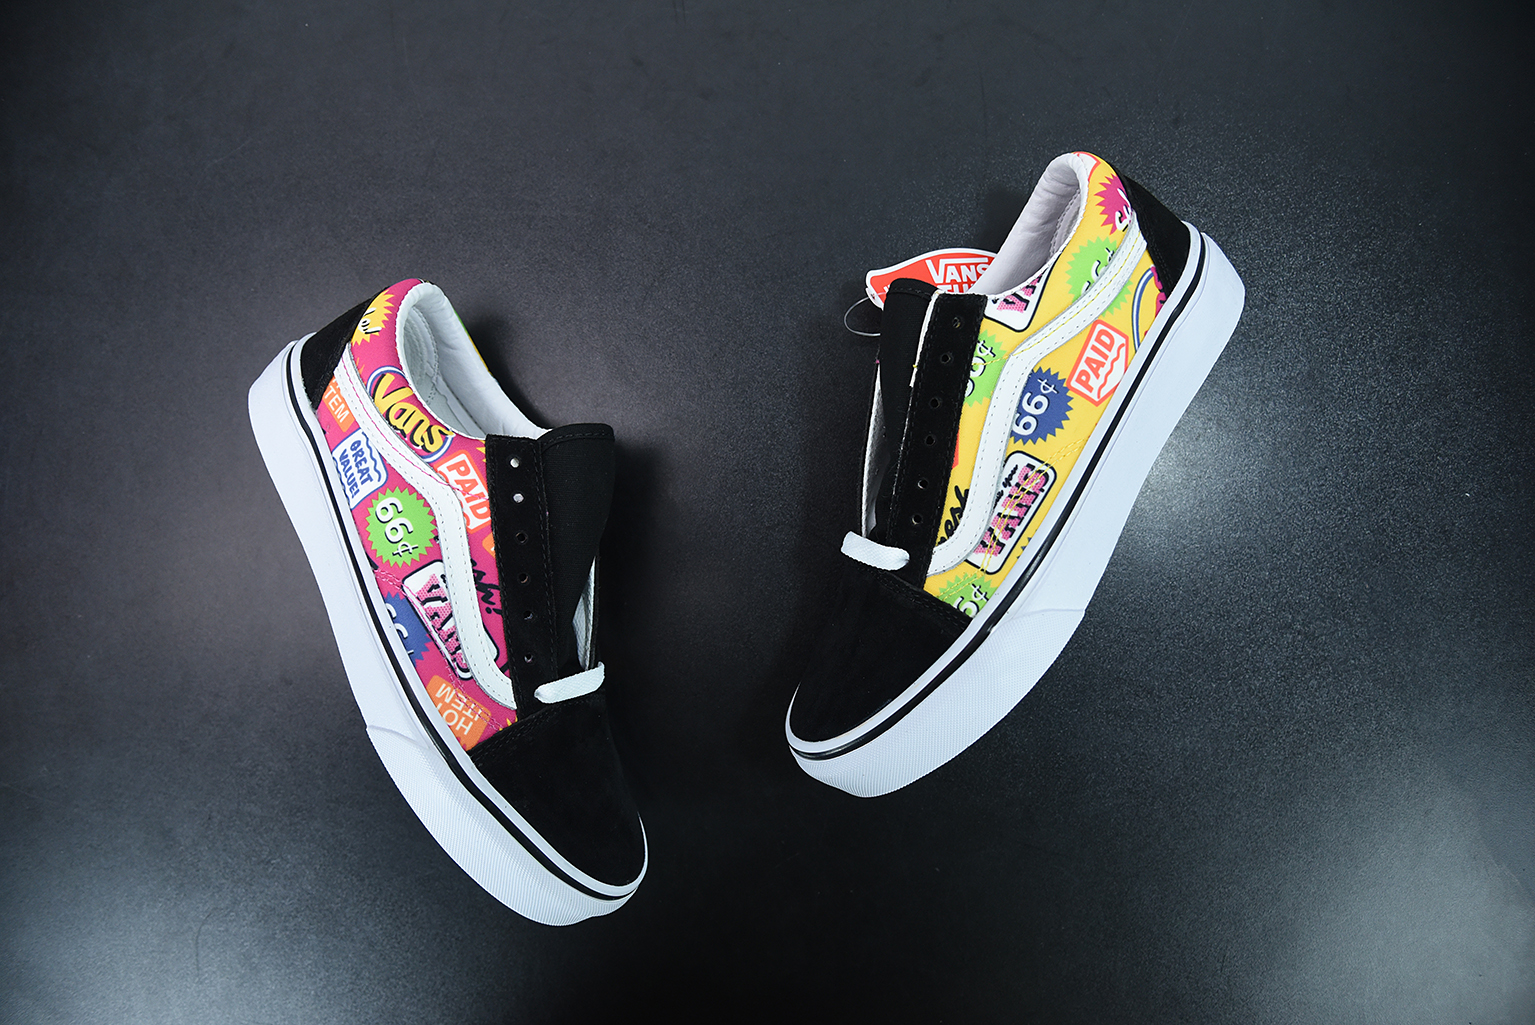 Dingy rive ned gasformig el producto Vans Bess Ni EU 36 1 2 Check Classic White True White - Color  For Sale – Vans X Toy Story Authentic Multi Print Black True White - Vans  Old Skool Black Multi